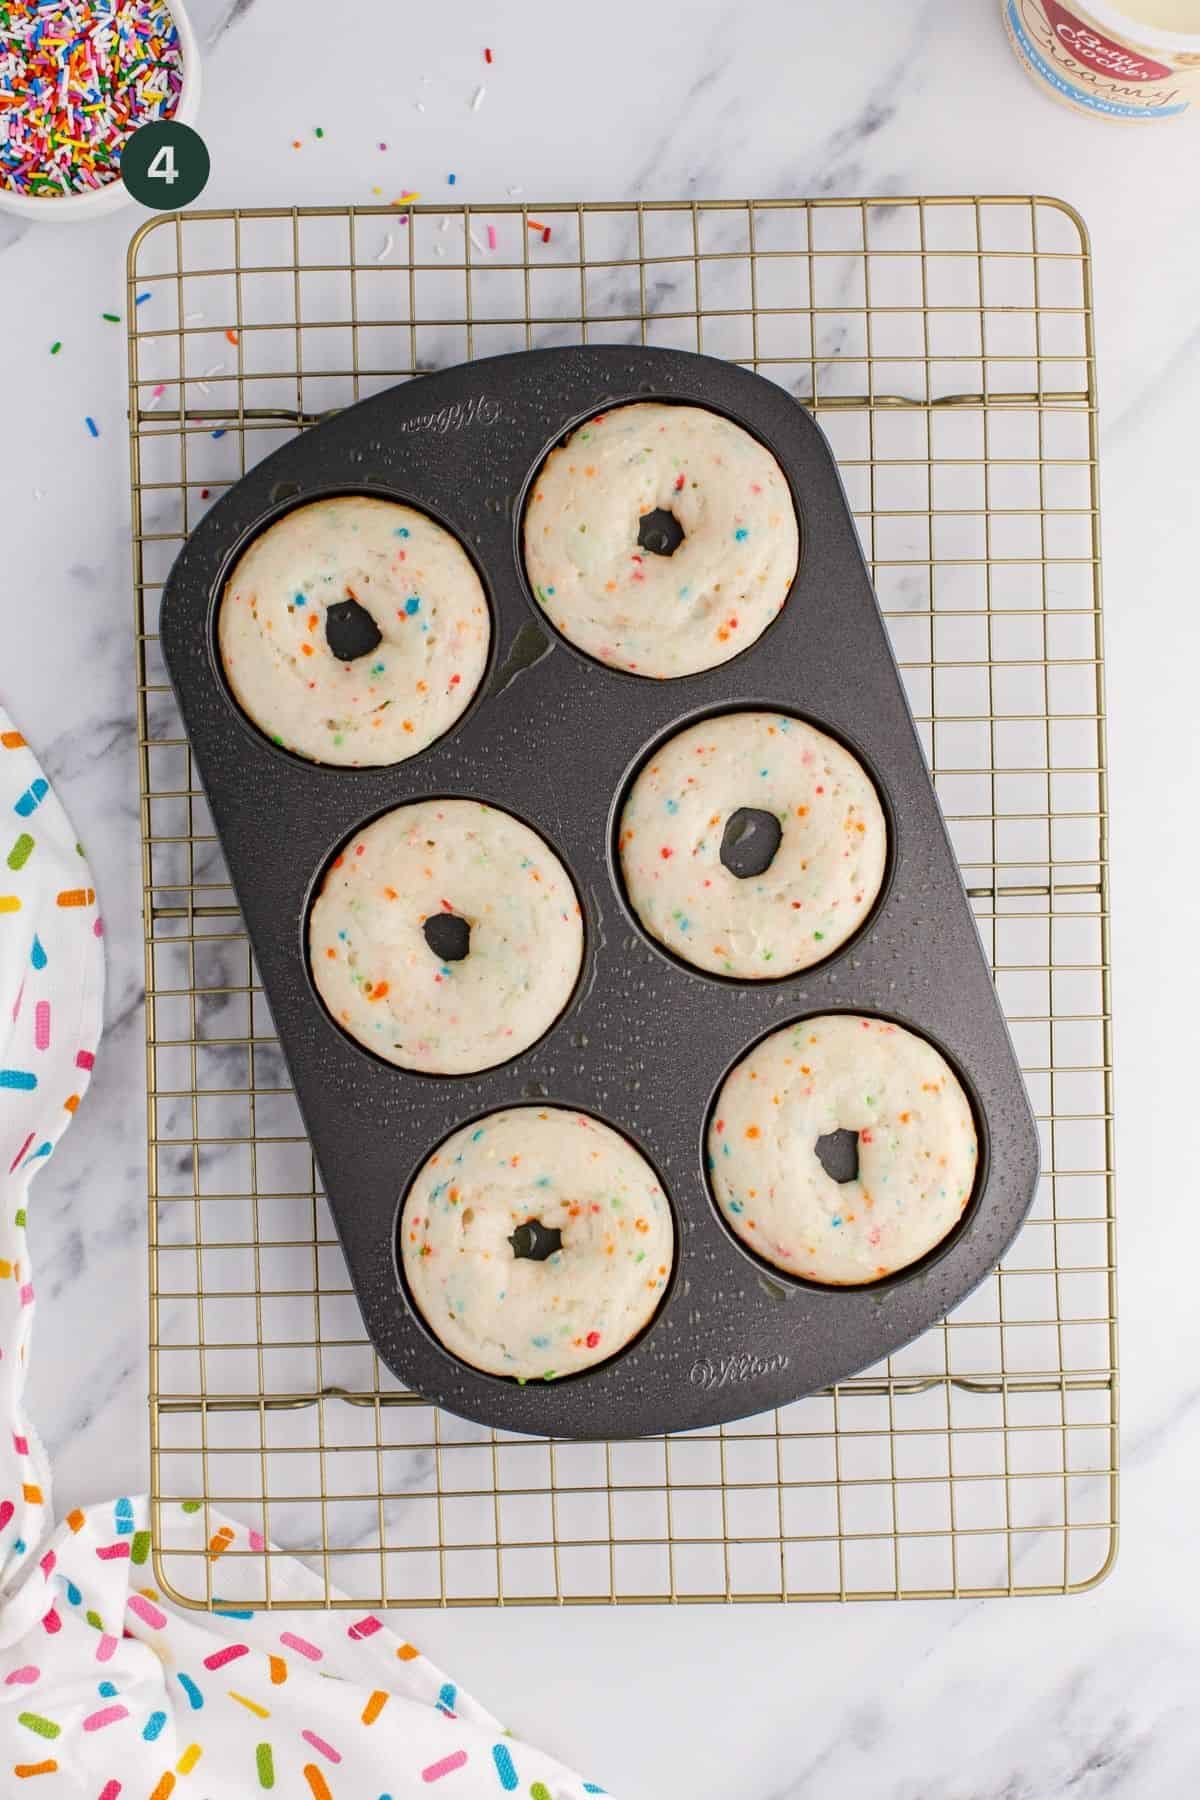 Six baked donuts in a donut pan on a wire rack.